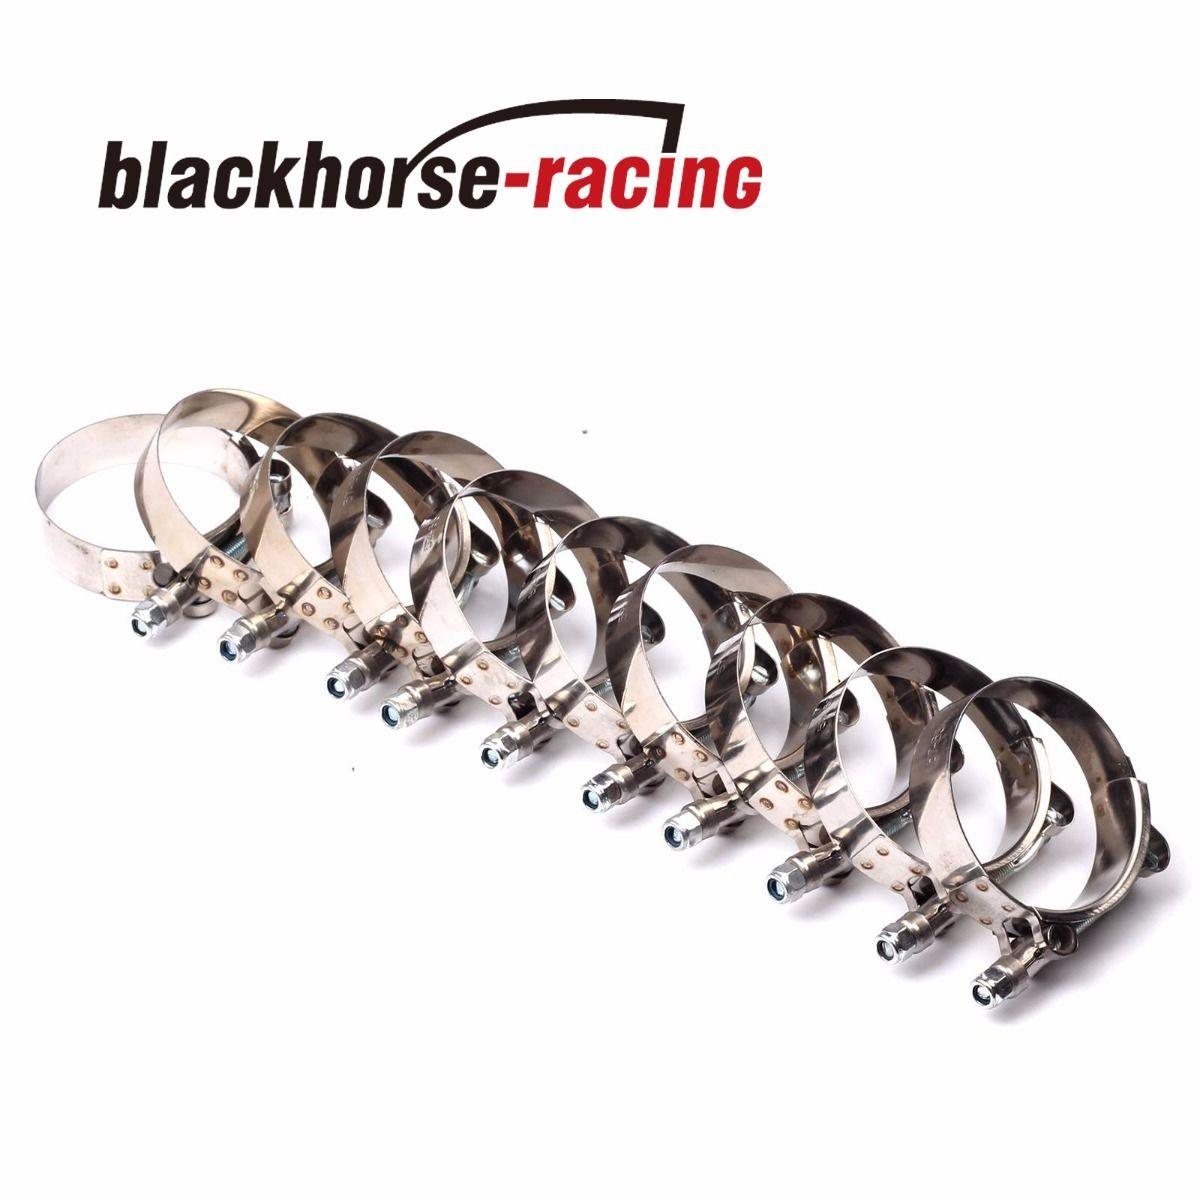 10PCS 3-1/8'' (3.39''-3.7'') 301 Stainless Steel T Bolt Clamps Clamp 86mm-94mm - www.blackhorse-racing.com